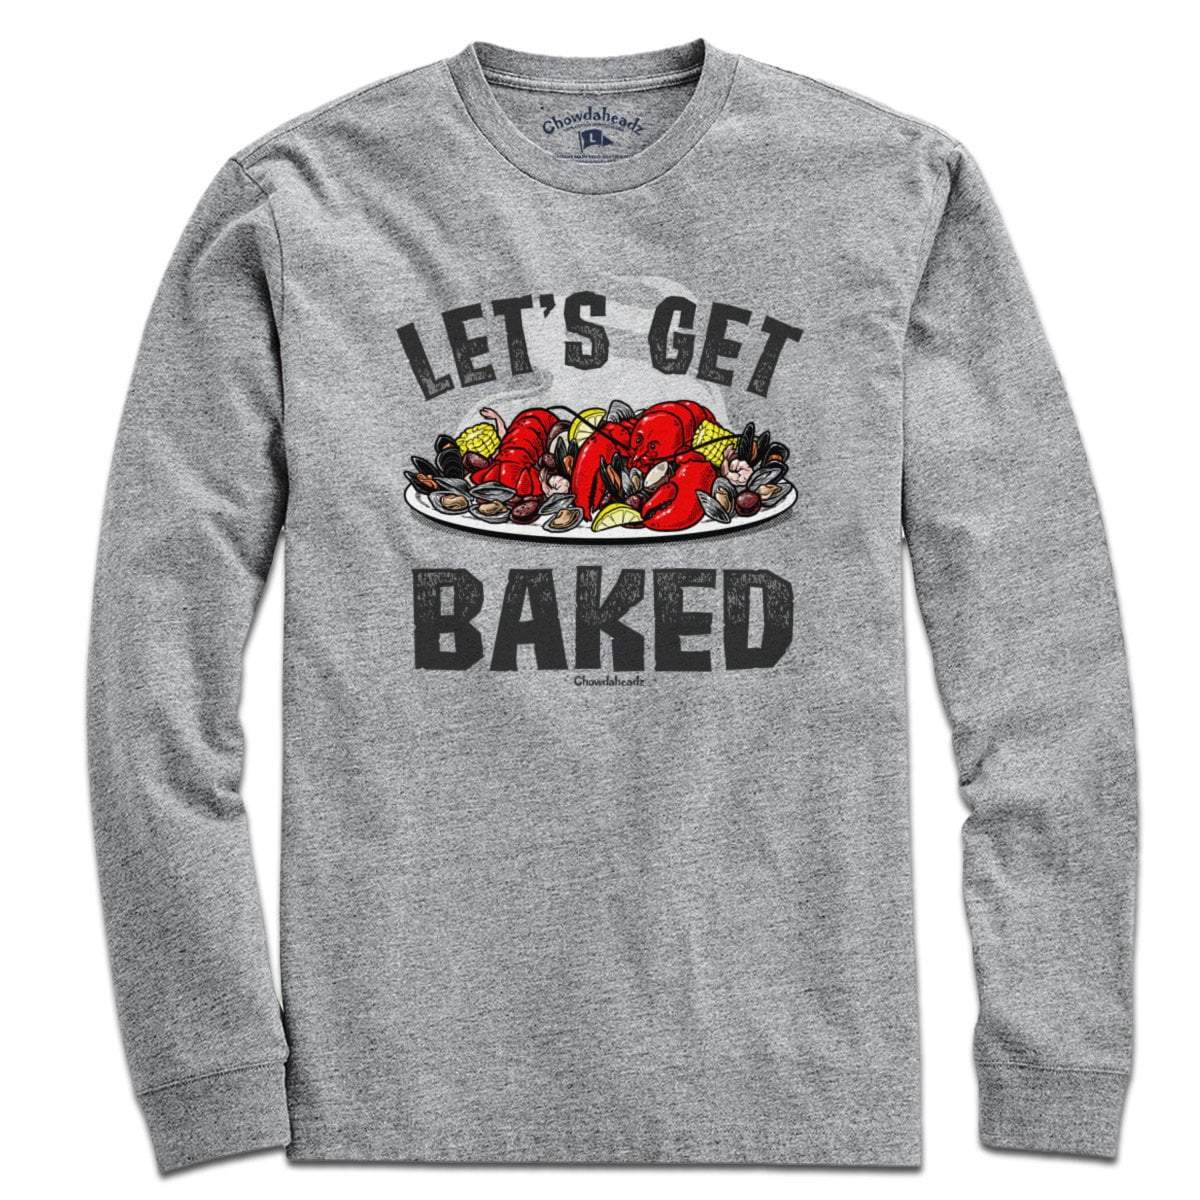 Let's Get Baked T-Shirt - Chowdaheadz